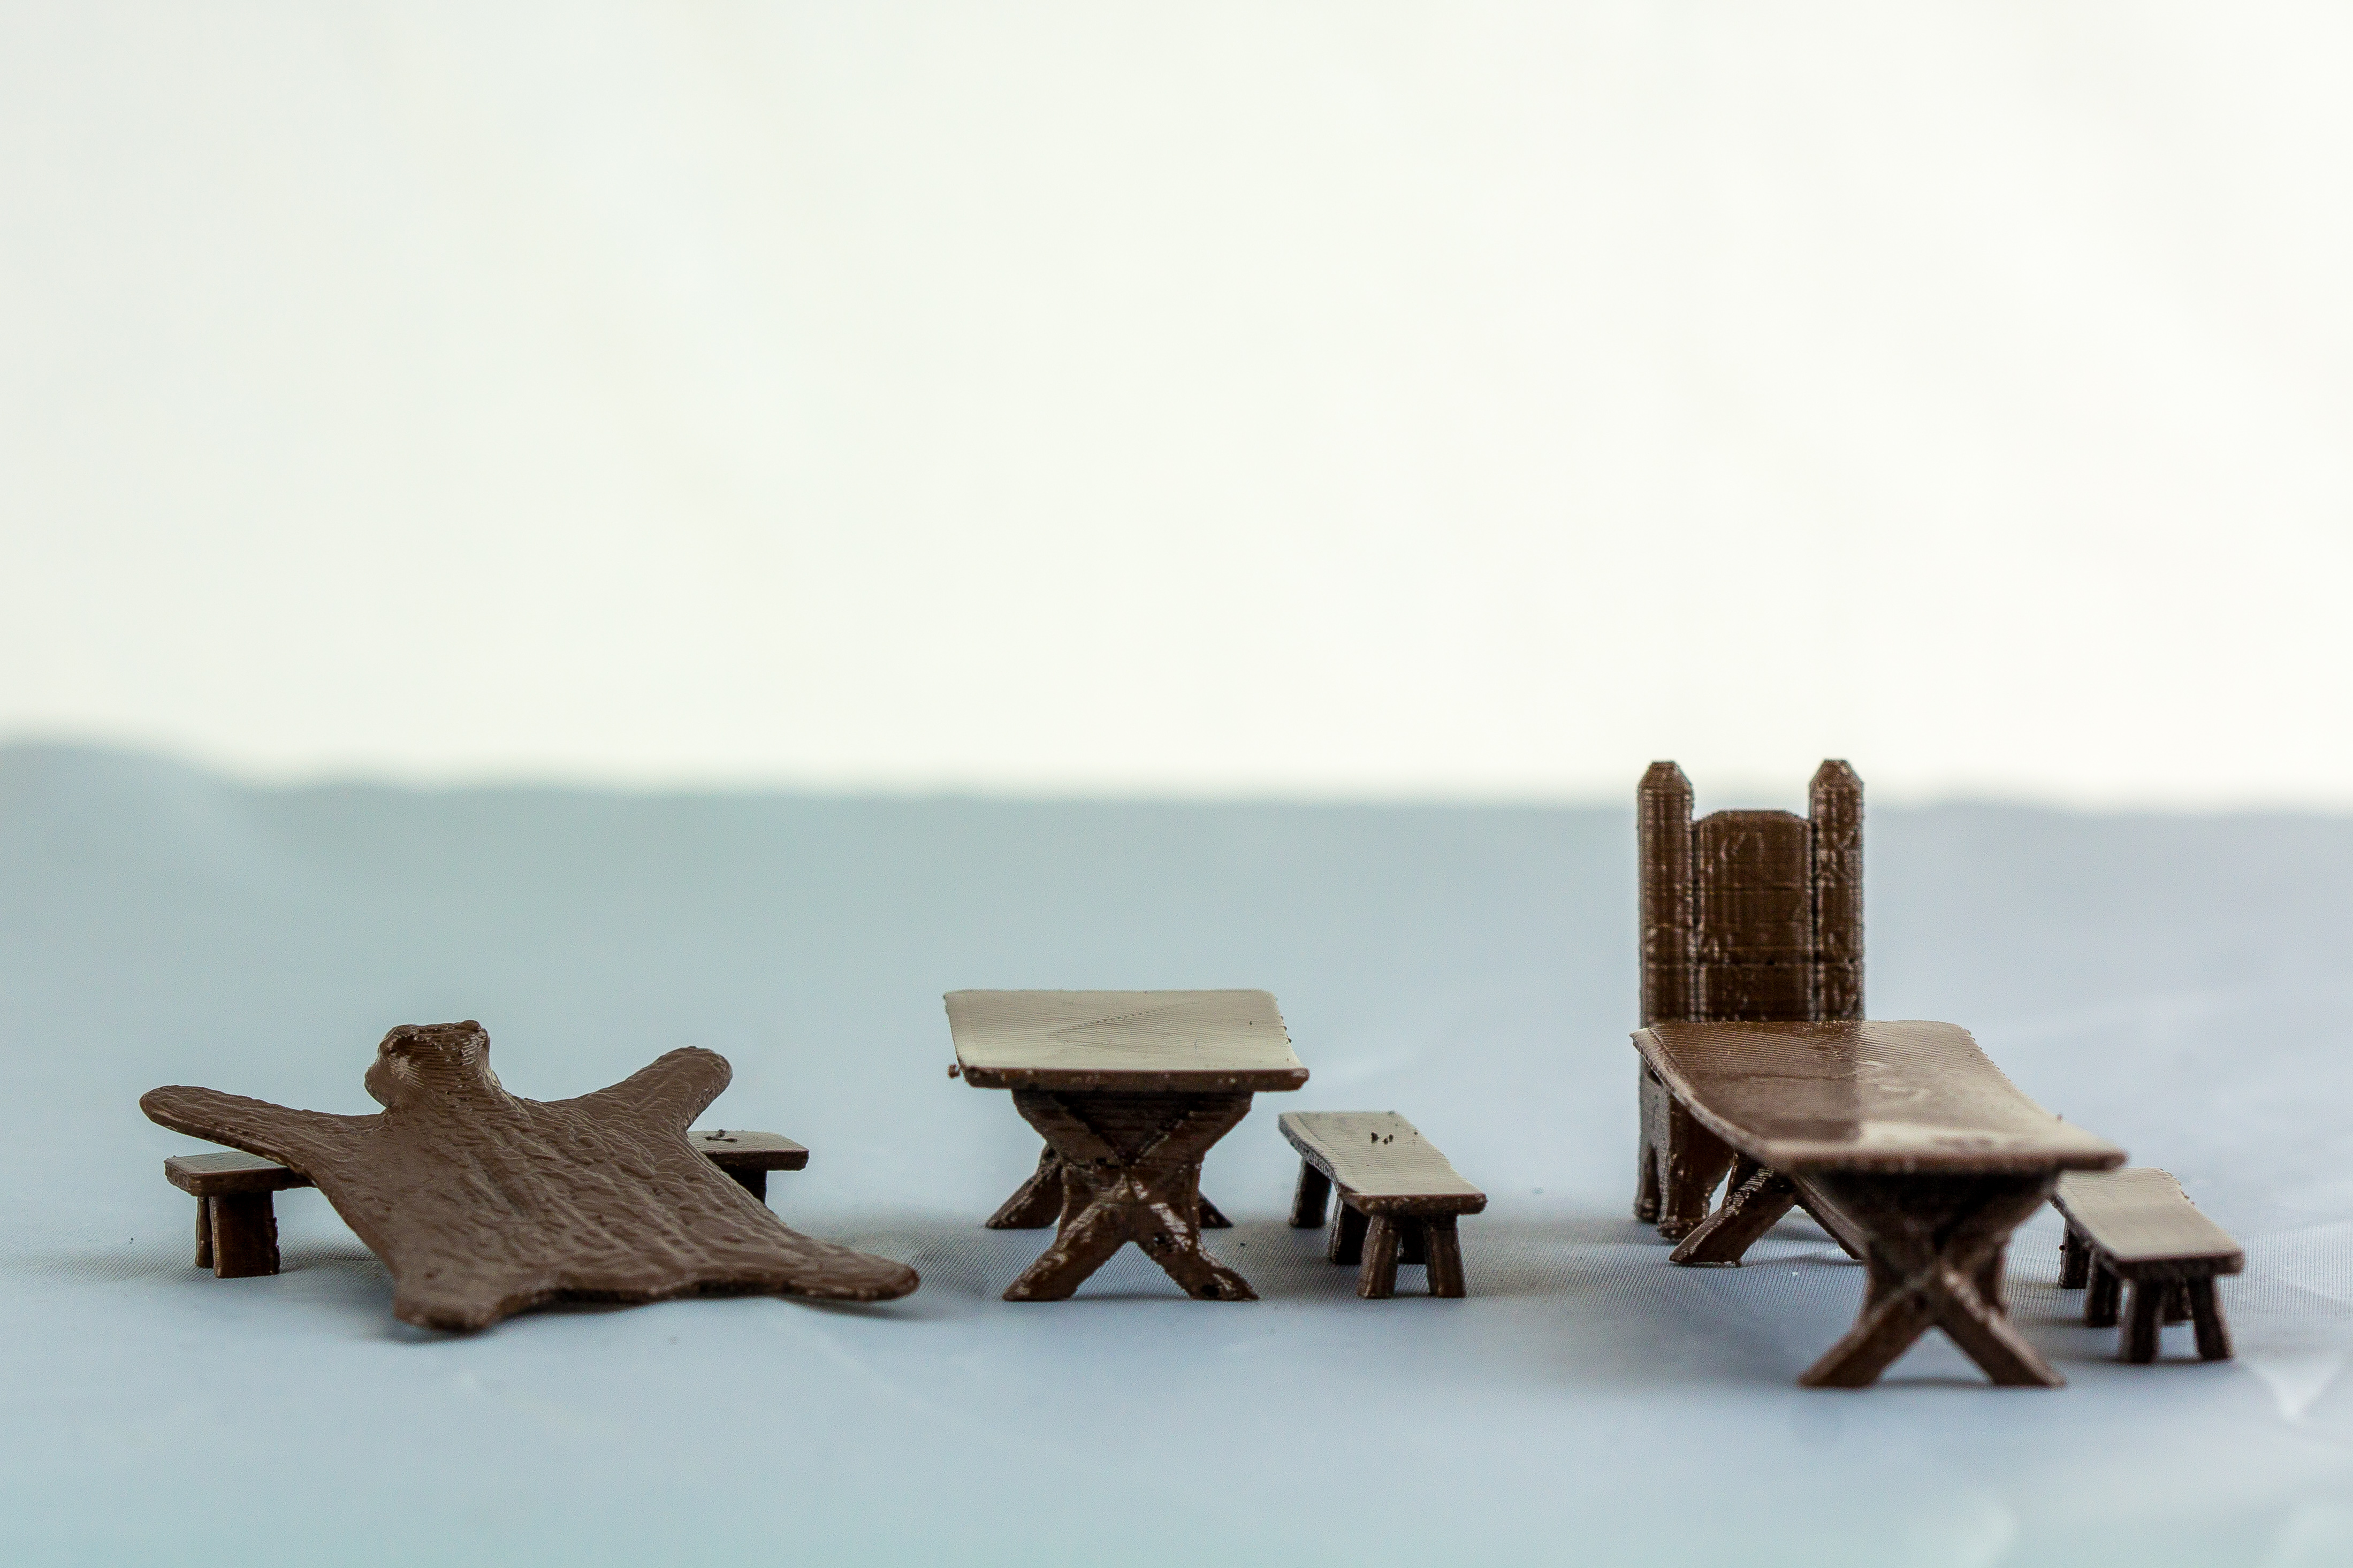 Terrain 4 Print: Fantasy/Historic tables, benches, chairs and bear rug.